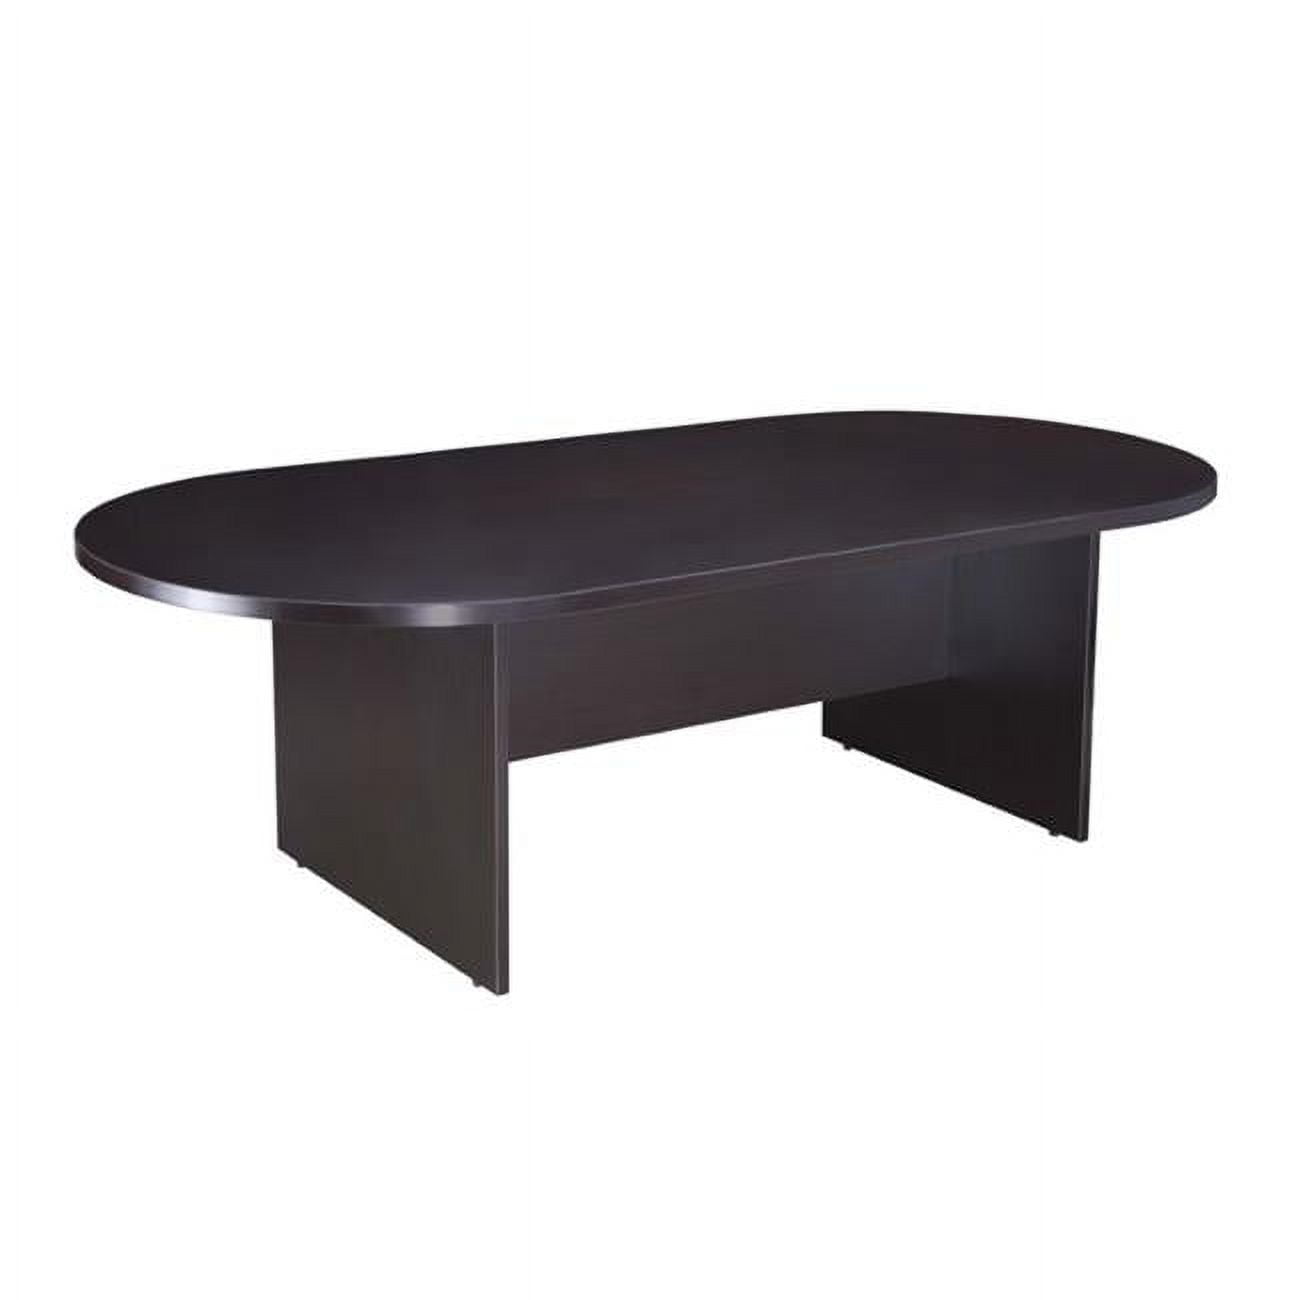 N136-moc 29.5 X 95 X 43 In. R - T Conference Table, Mocha